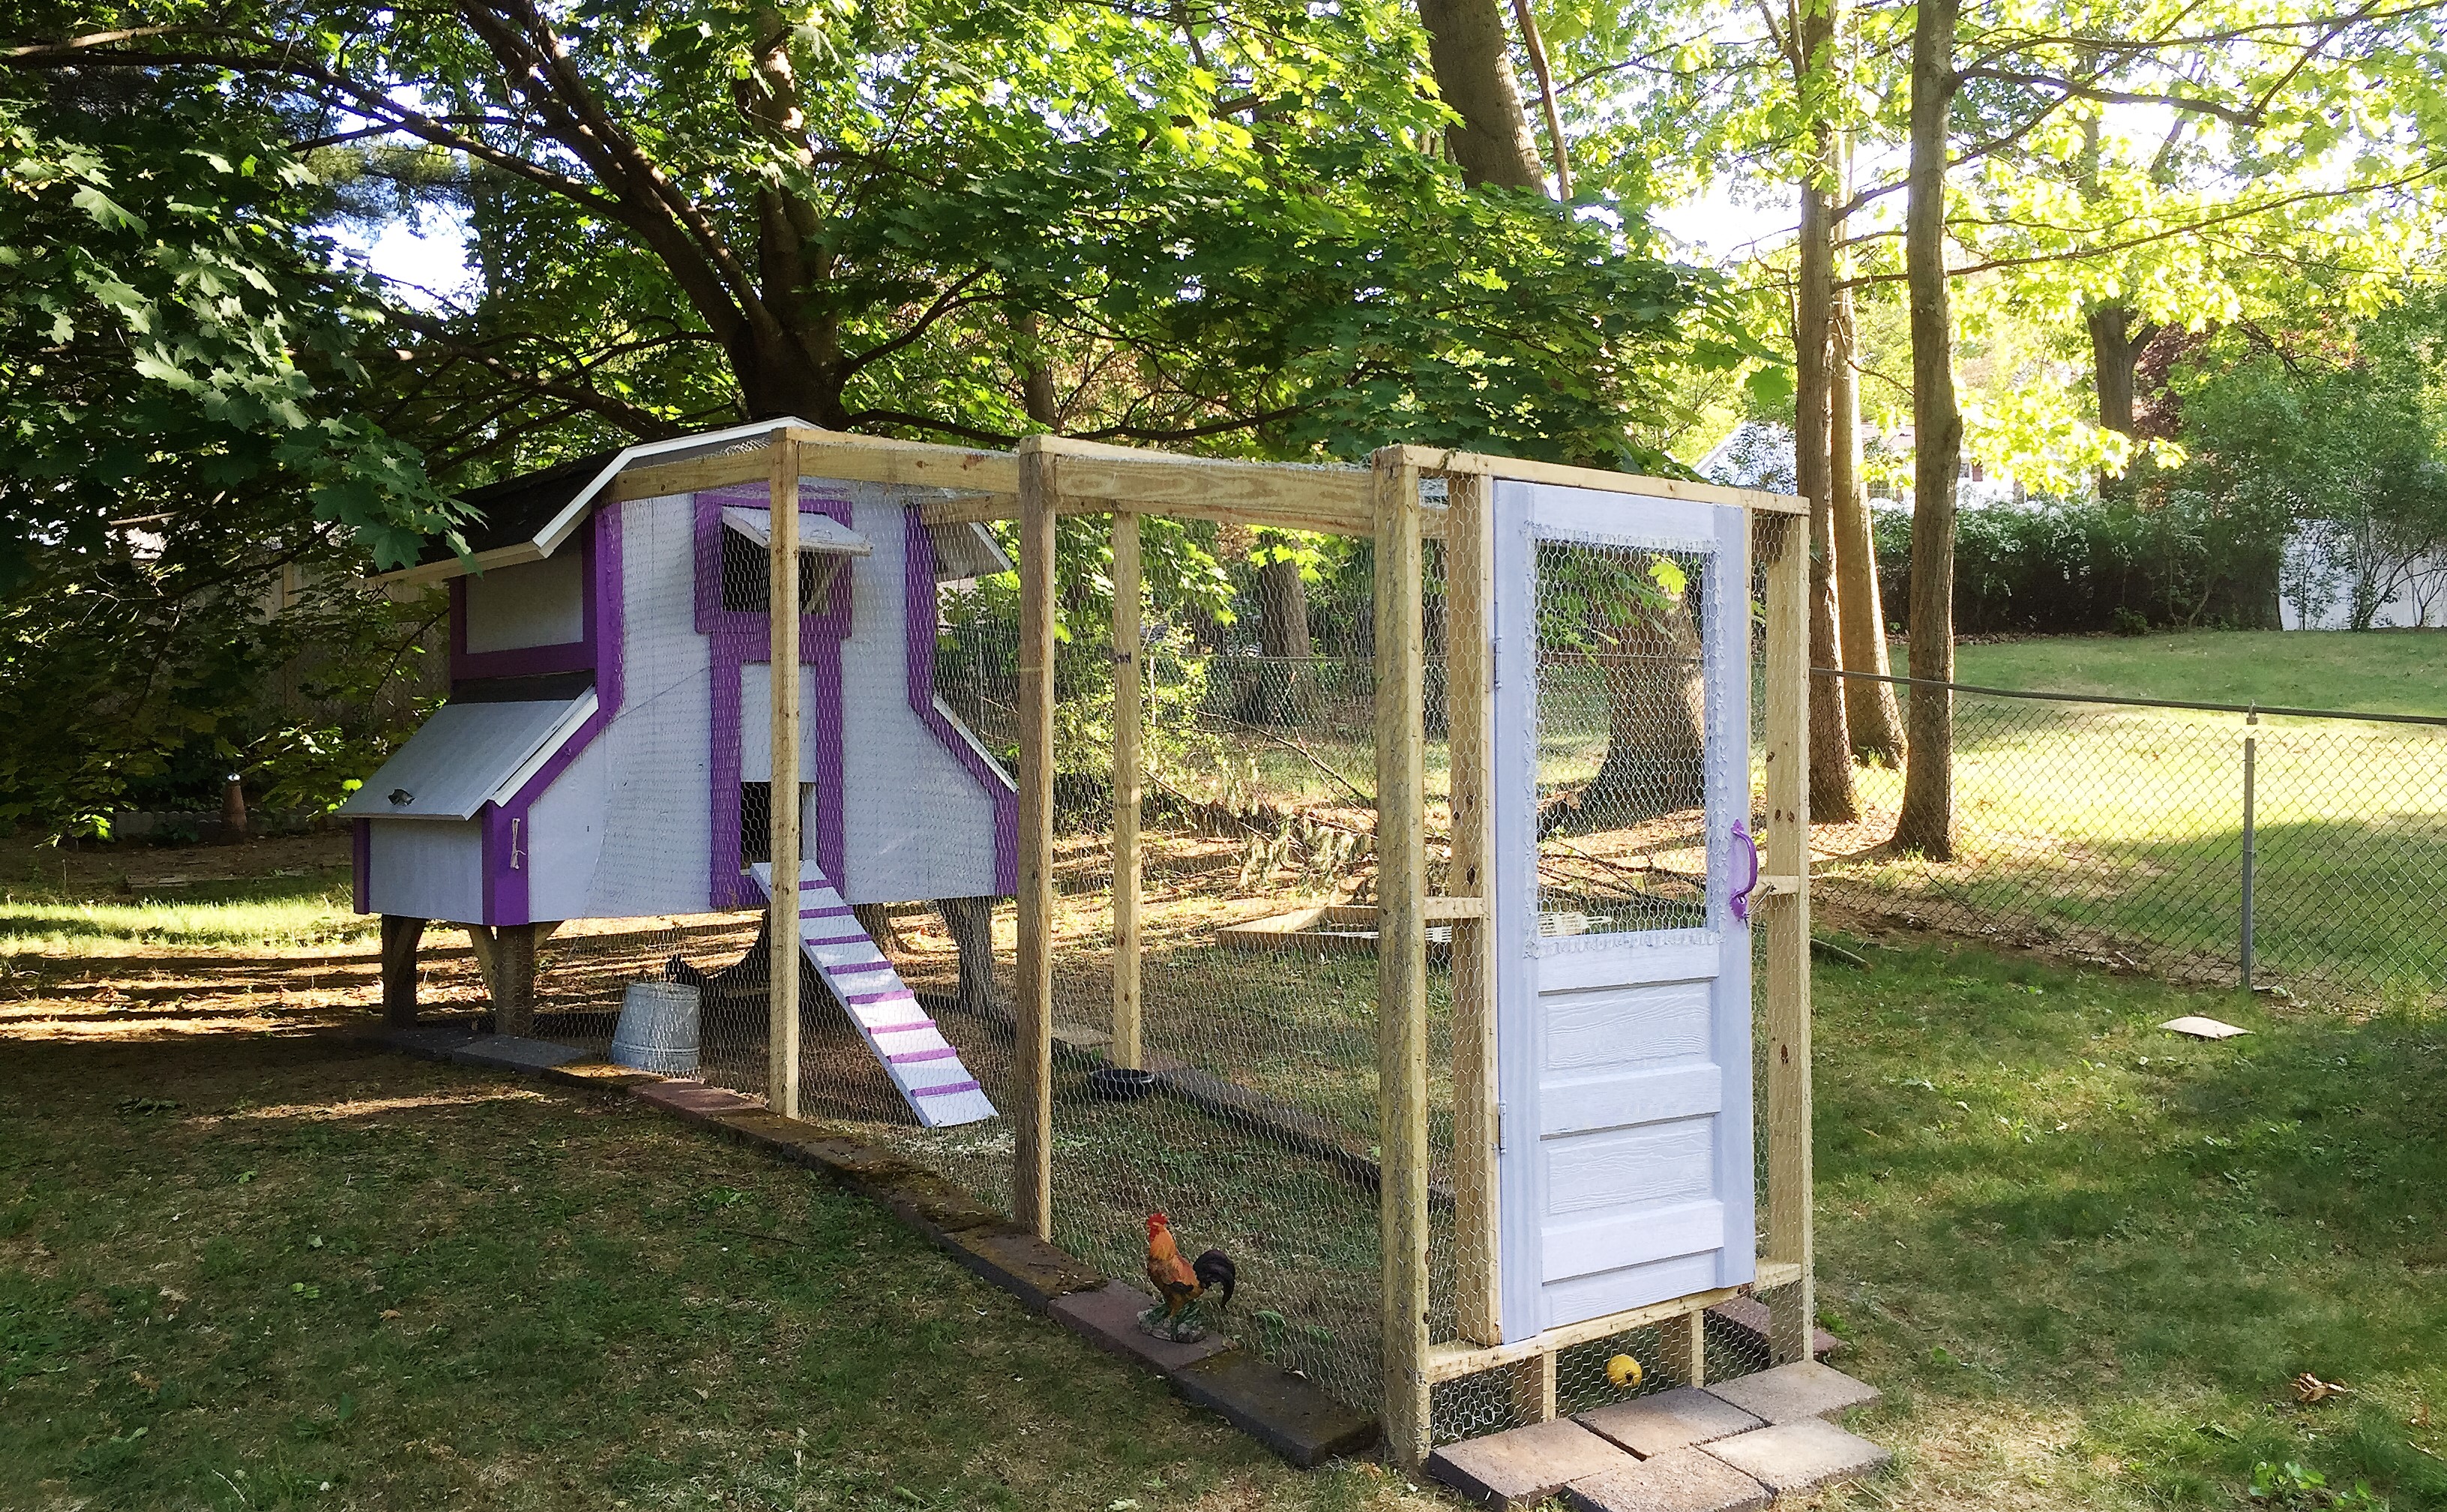 My daughters boyfriend and I designed the coop. He built, with some help from his  dad, this gorgeous coop.